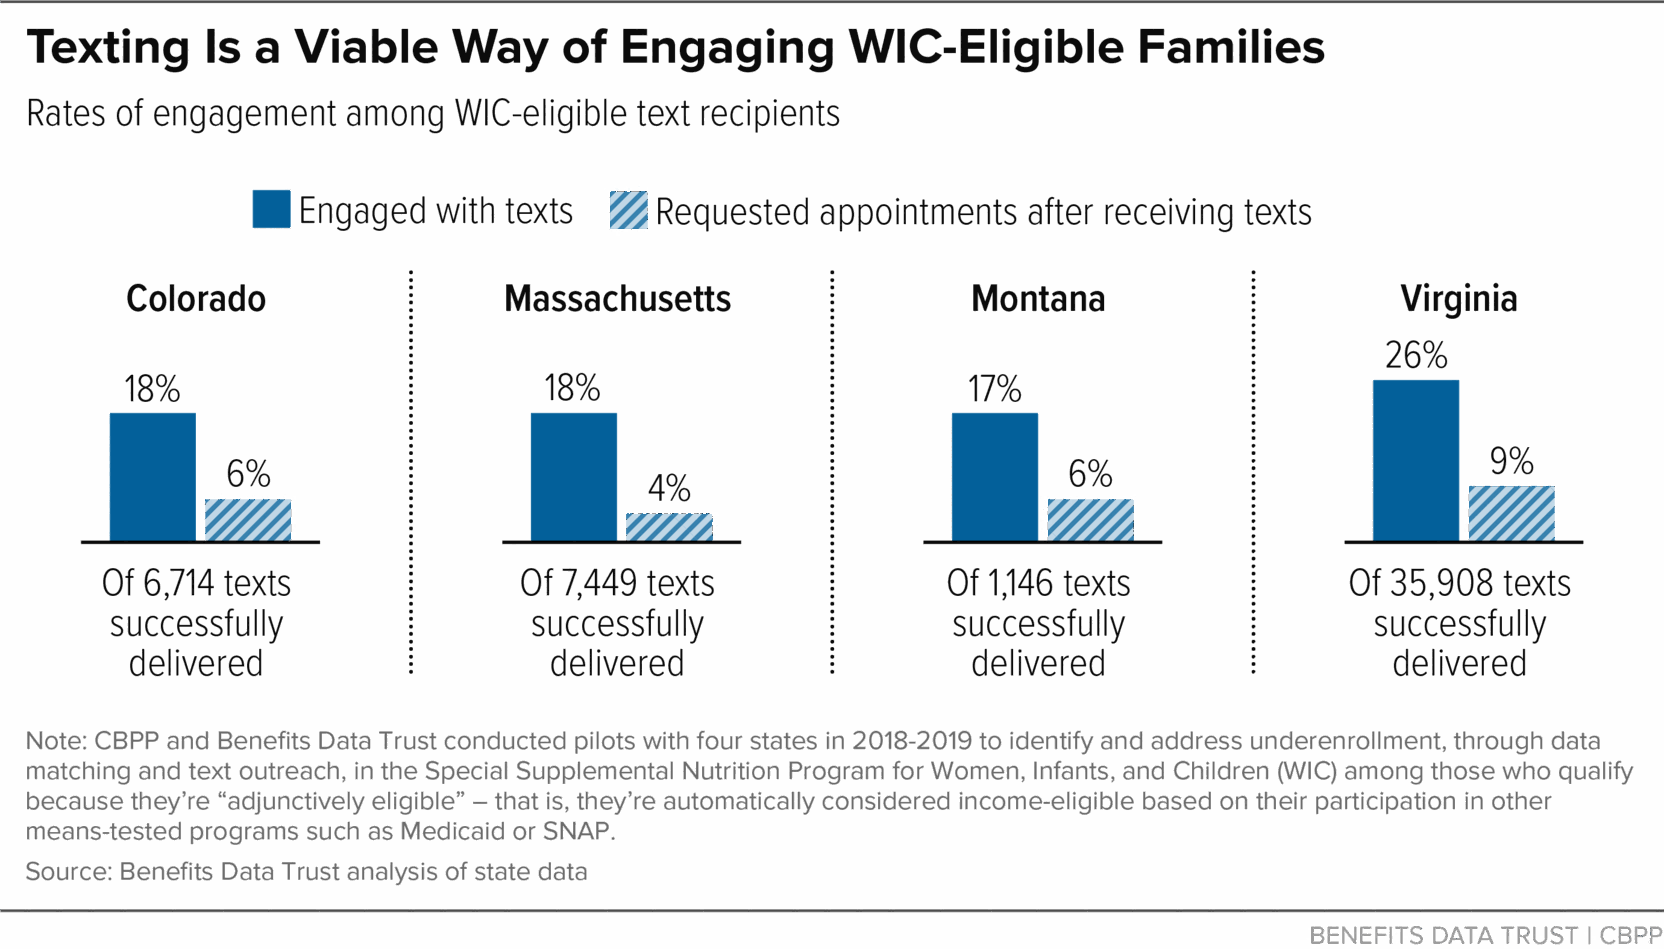 Texting is a Viable Way of Engaging WIC-Eligible Families